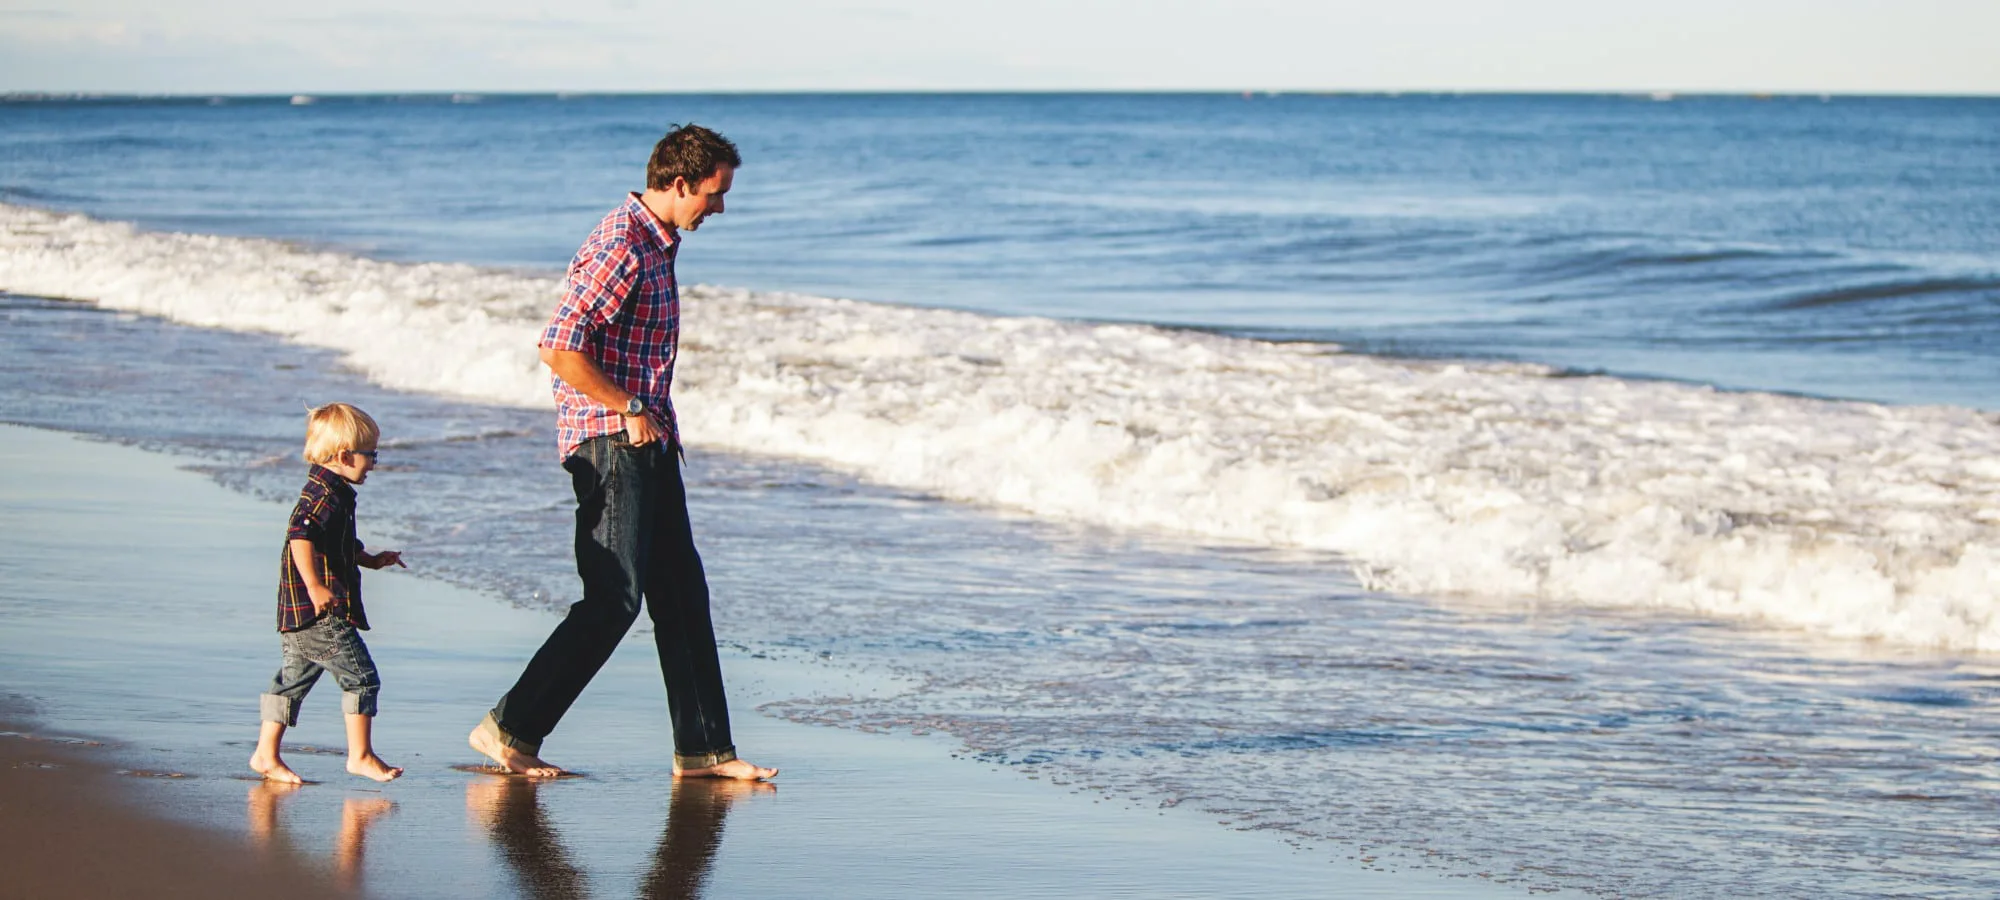 man and young boy walking on the beach towards the water